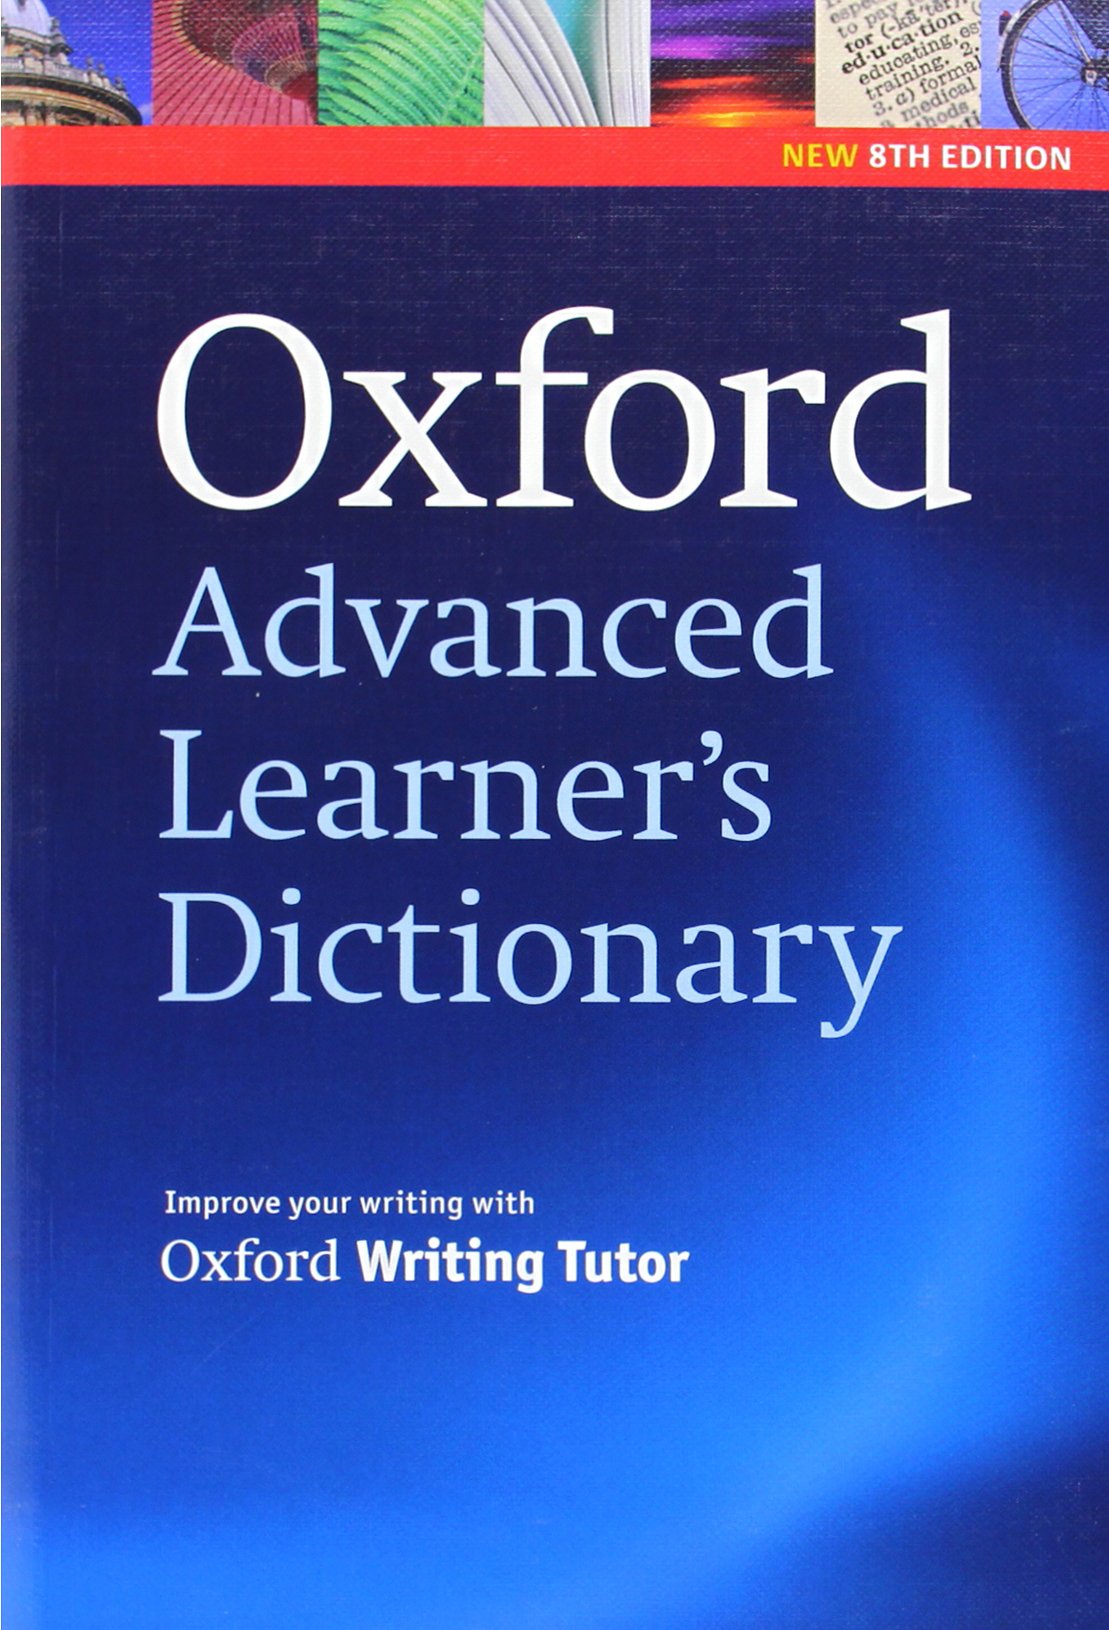 Advanced learner s dictionary. Oxford Advanced Learner's Dictionary. Oxford Advanced Learner's Dictionary книга. Oxford Advanced Learner's Dictionary of current English. Oxford Advanced.